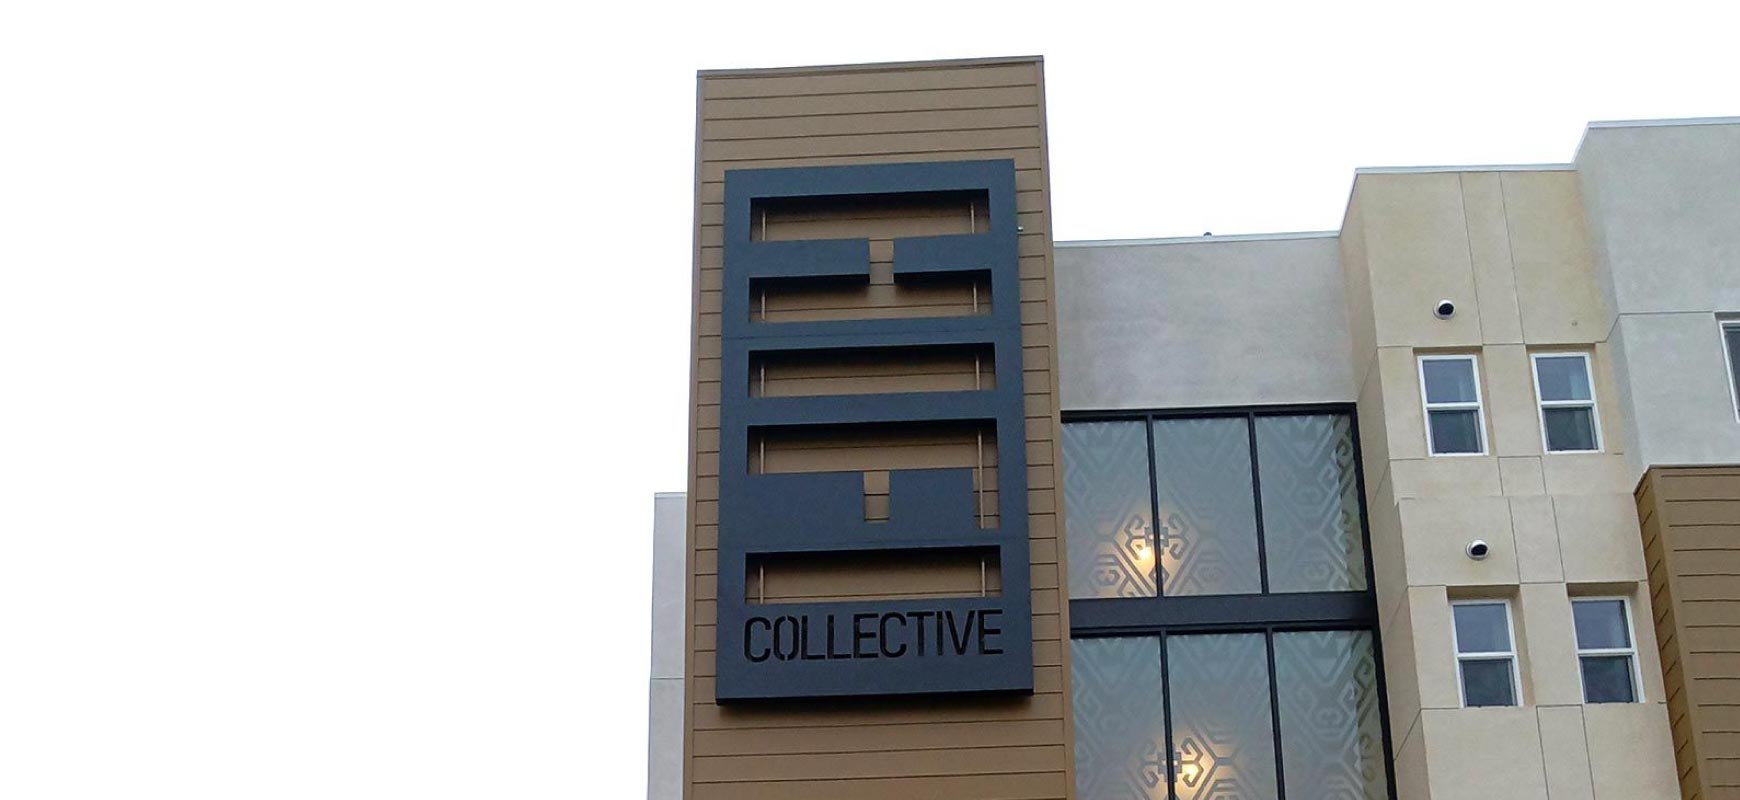 HIF Collective neighborhood signage in a wall-mount style made of aluminum and lexan